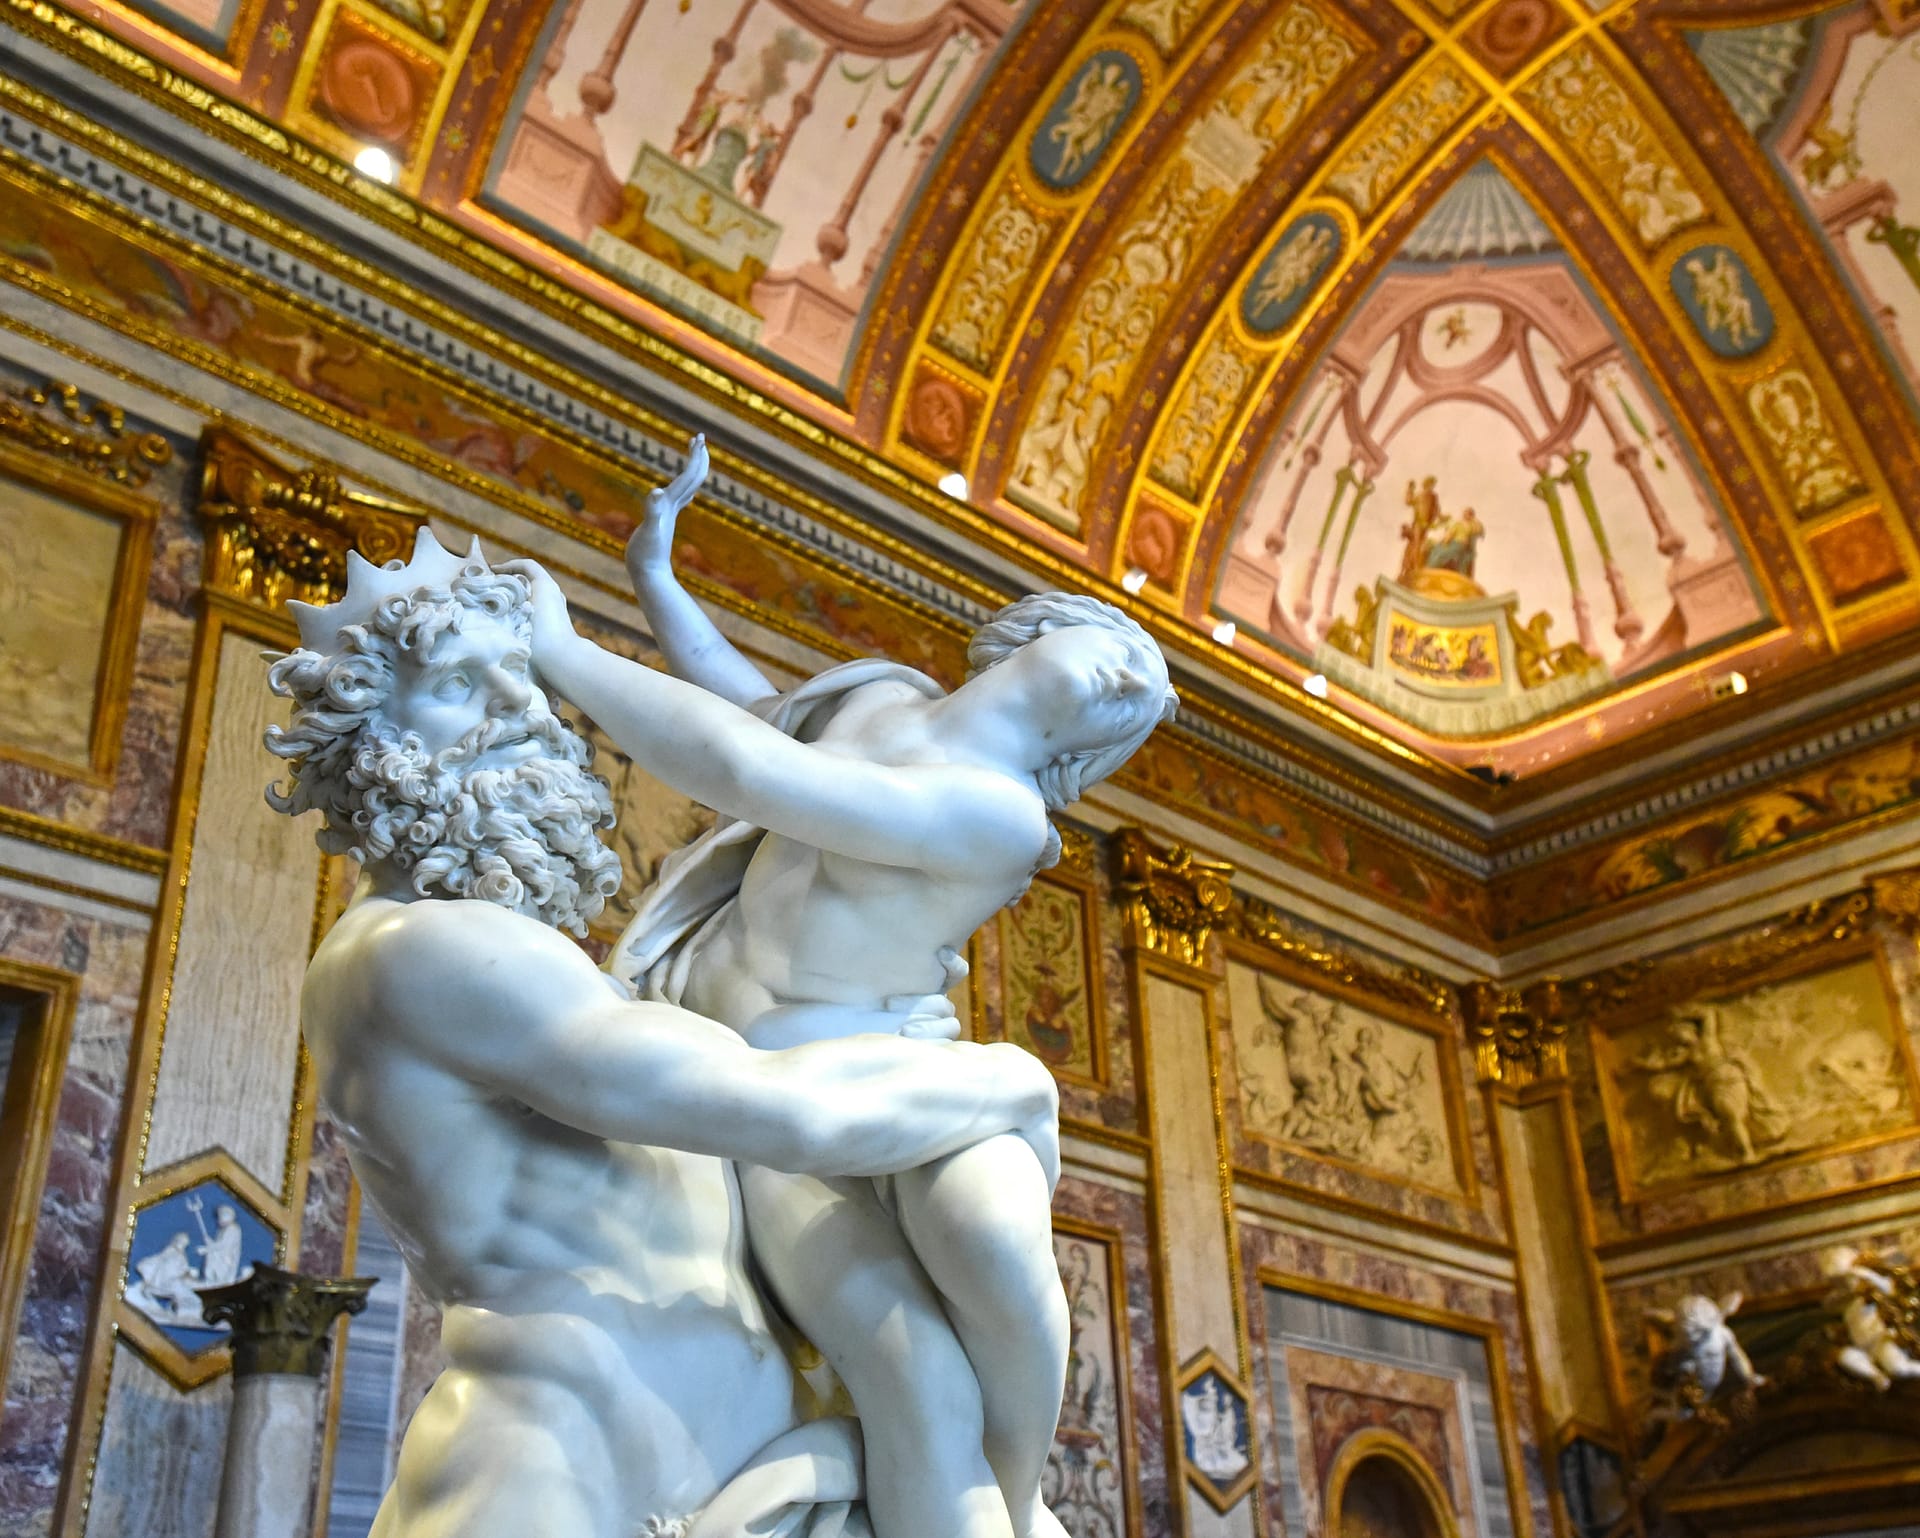 Borghese Gallery and Museum in Rome